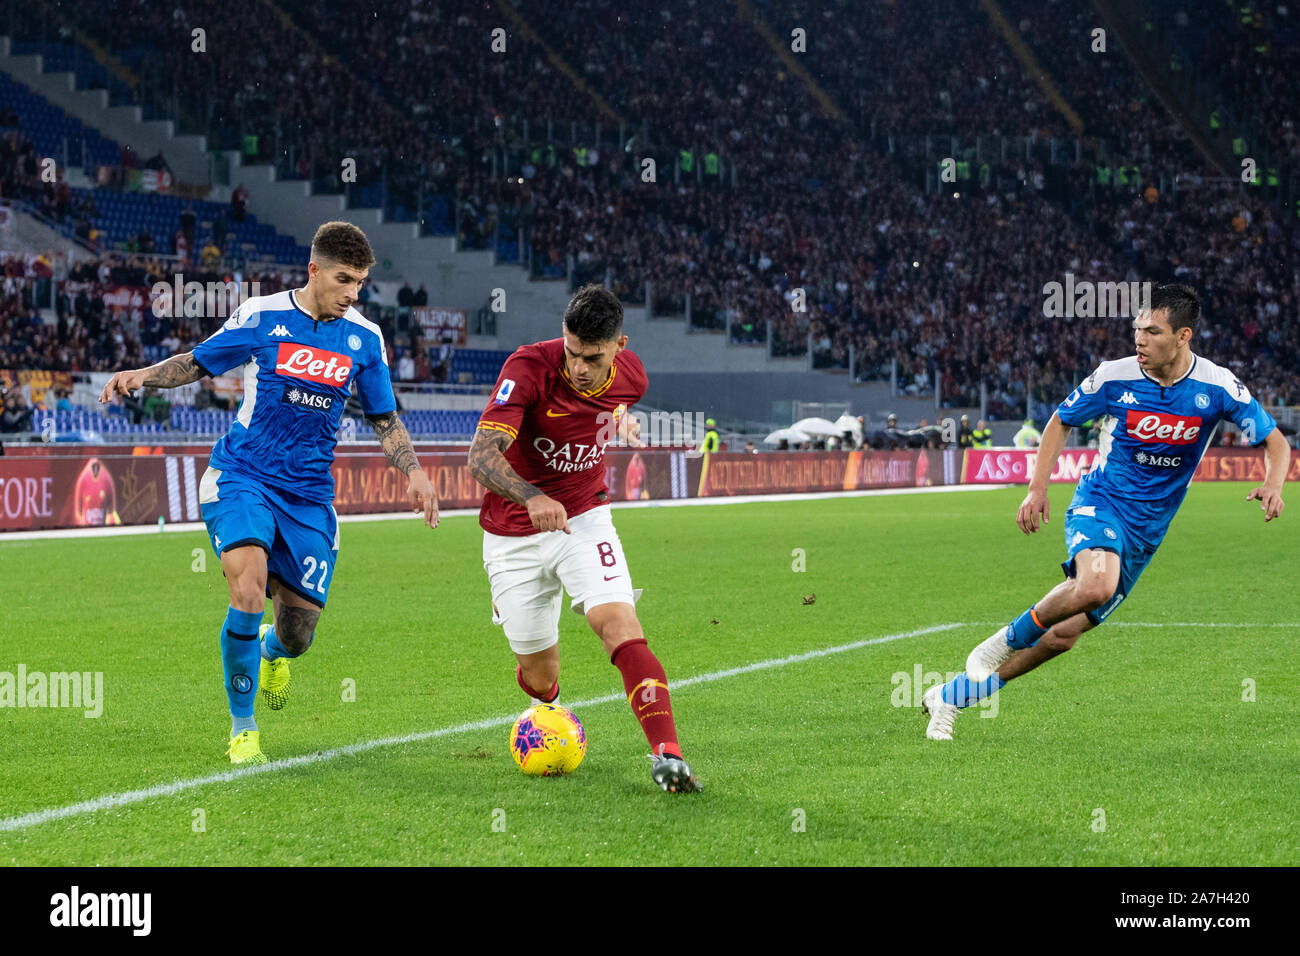 Diego Perotti of AS Roma seen in action during the Italian Serie A football match between AS Roma and SSC Napoli at the Olympic Stadium in Rome.(Final score; AS Roma 2:1 SSC Napoli) Stock Photo